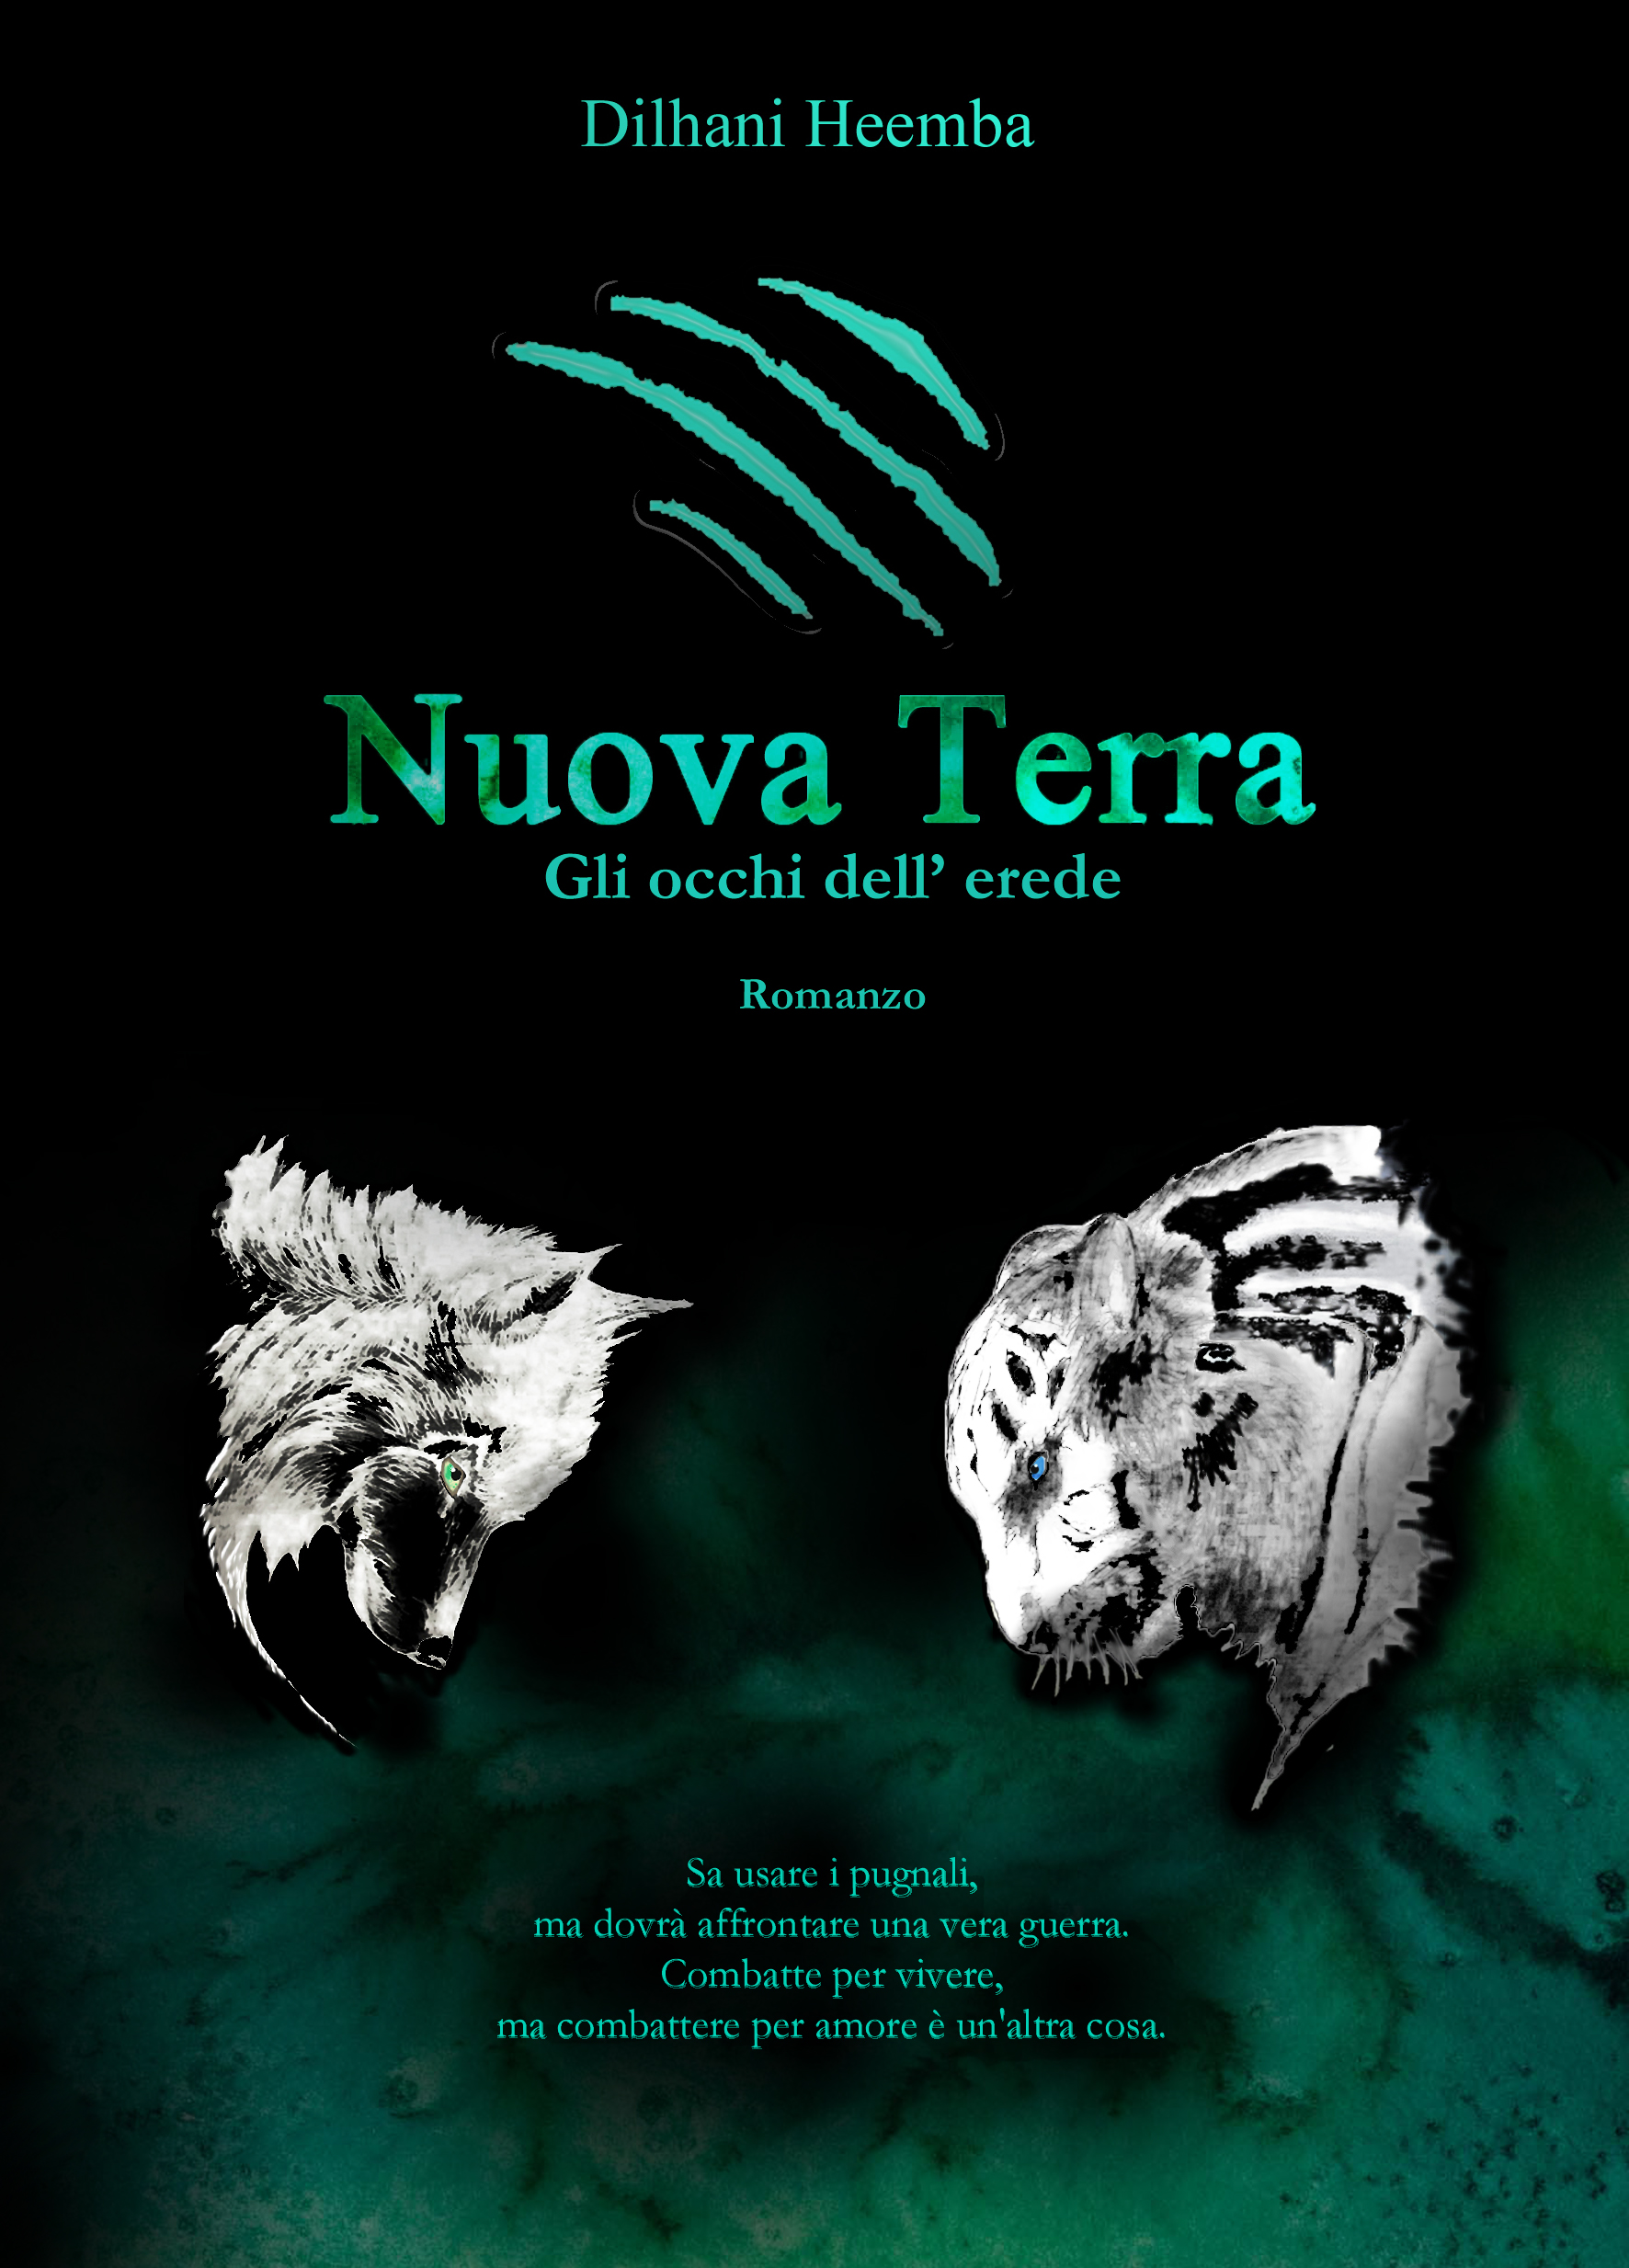 More about Nuova Terra